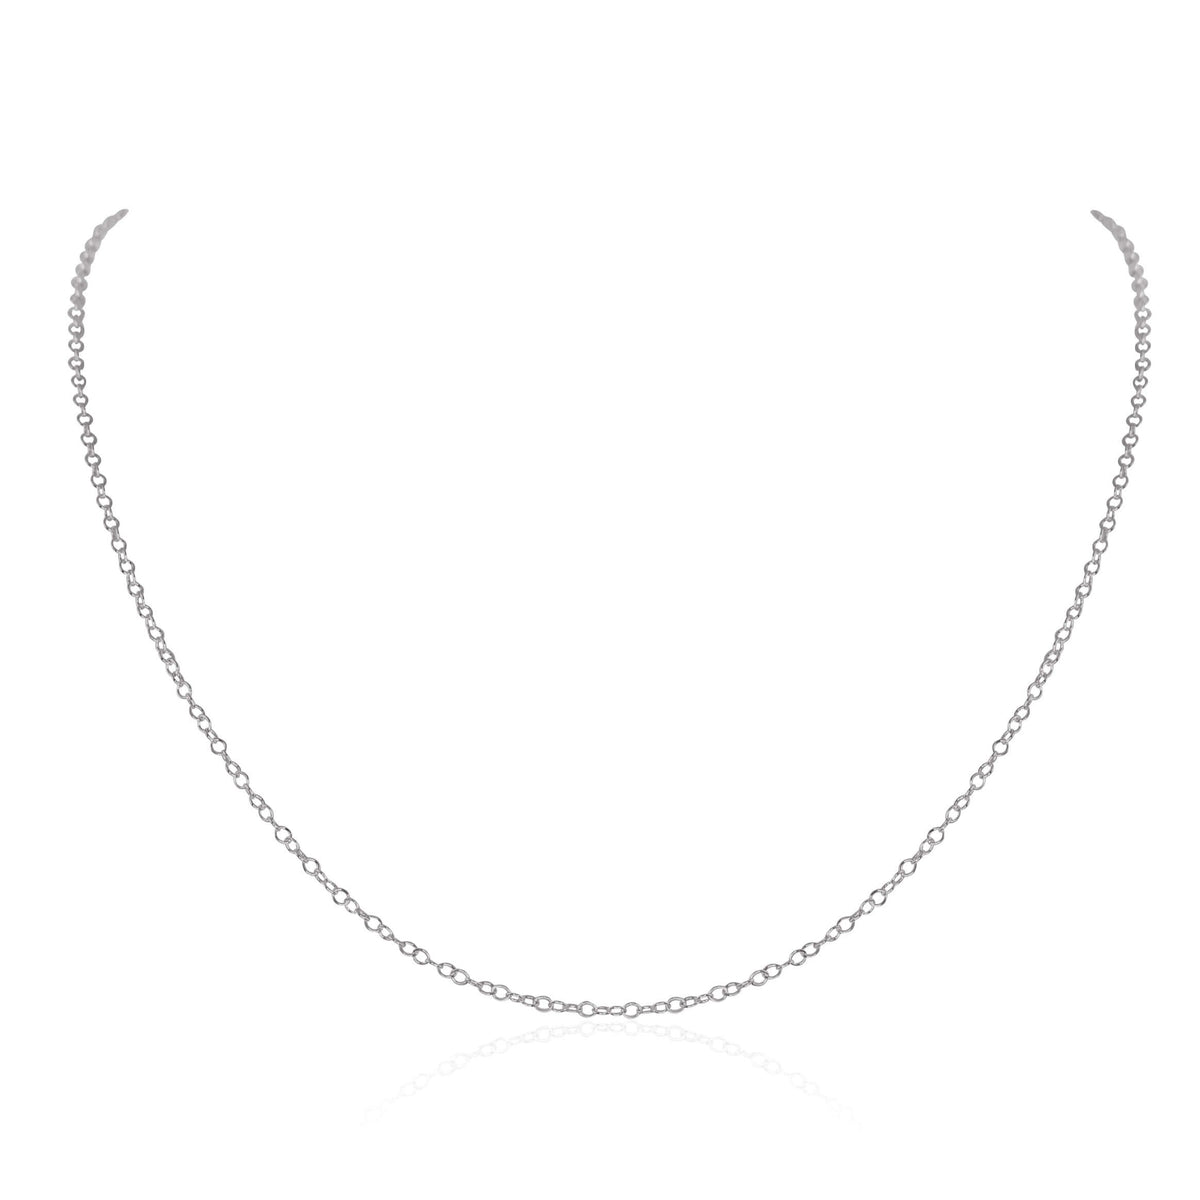 Simple Chain Necklace - Stainless Steel - Luna Tide Handmade Jewellery